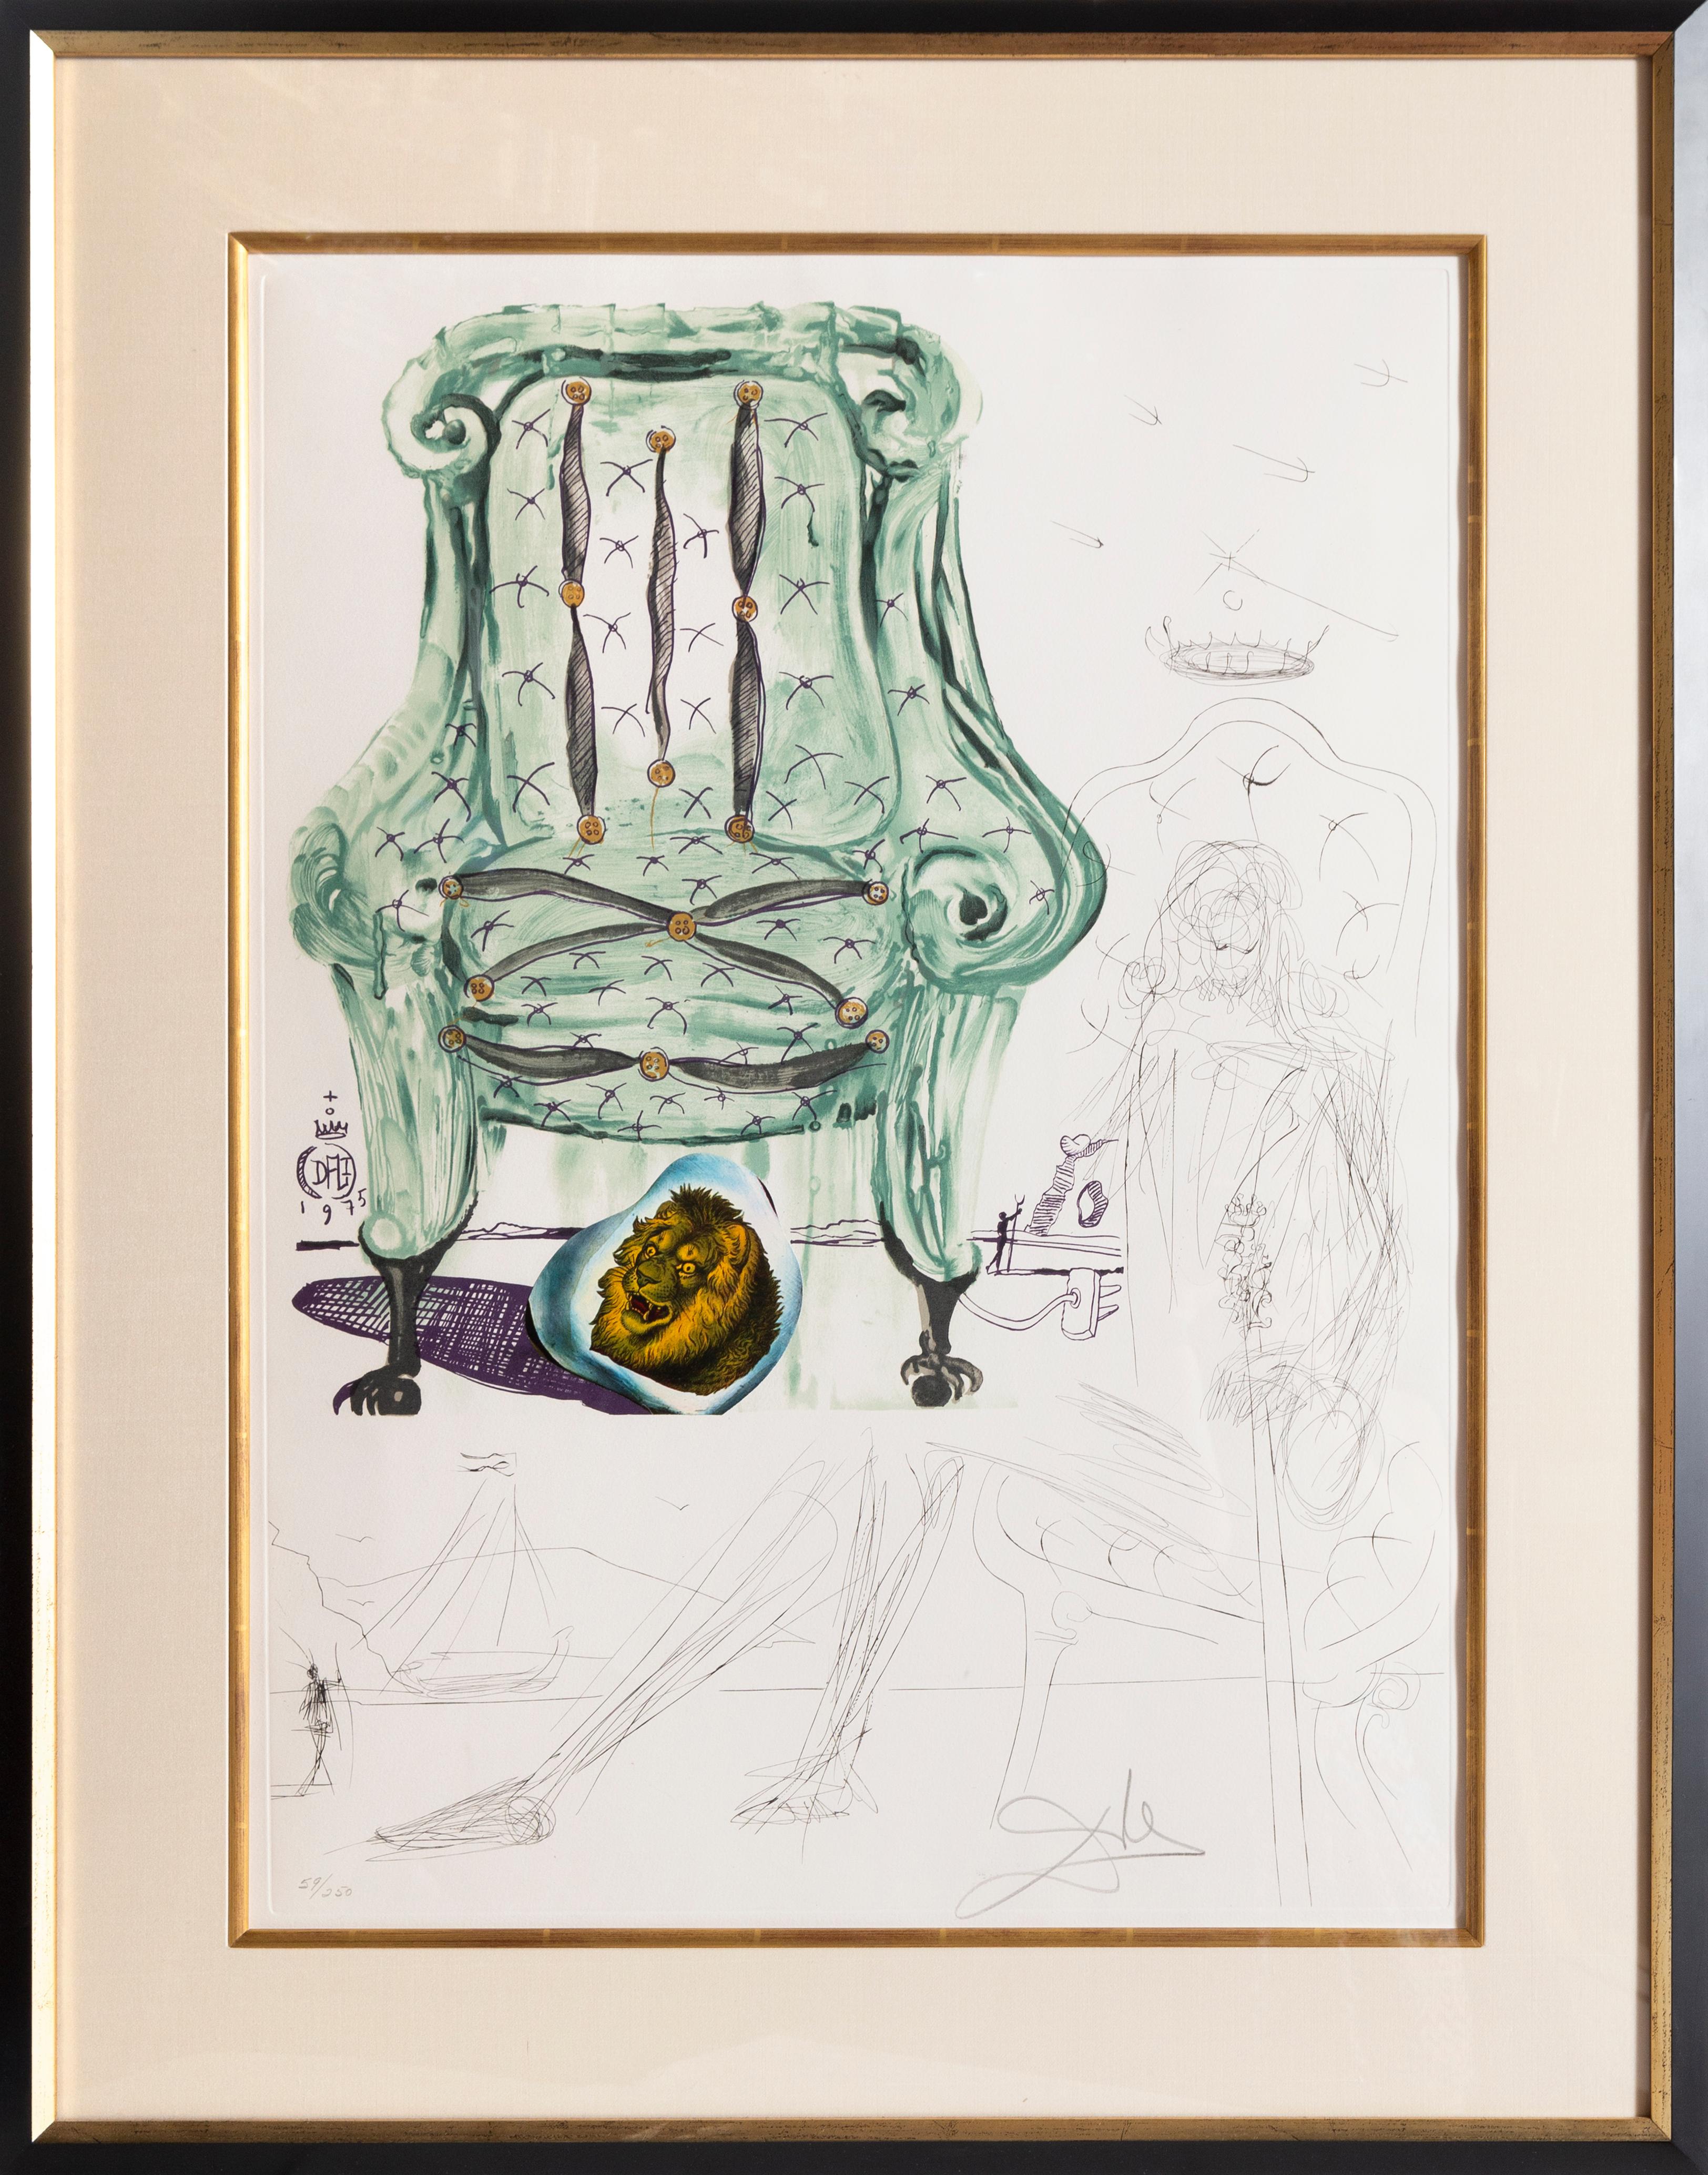 Artist:	Salvador Dali
Portfolio: Imaginations and Objects of the Future
Title:	Breathing Pneumatic Armchair
Year:	1975
Medium:	Lithograph with Collage on Arches, signed and numbered in pencil
Edition: 59/250
Paper Size:	30 x 22 inches (76 x 56 cm)